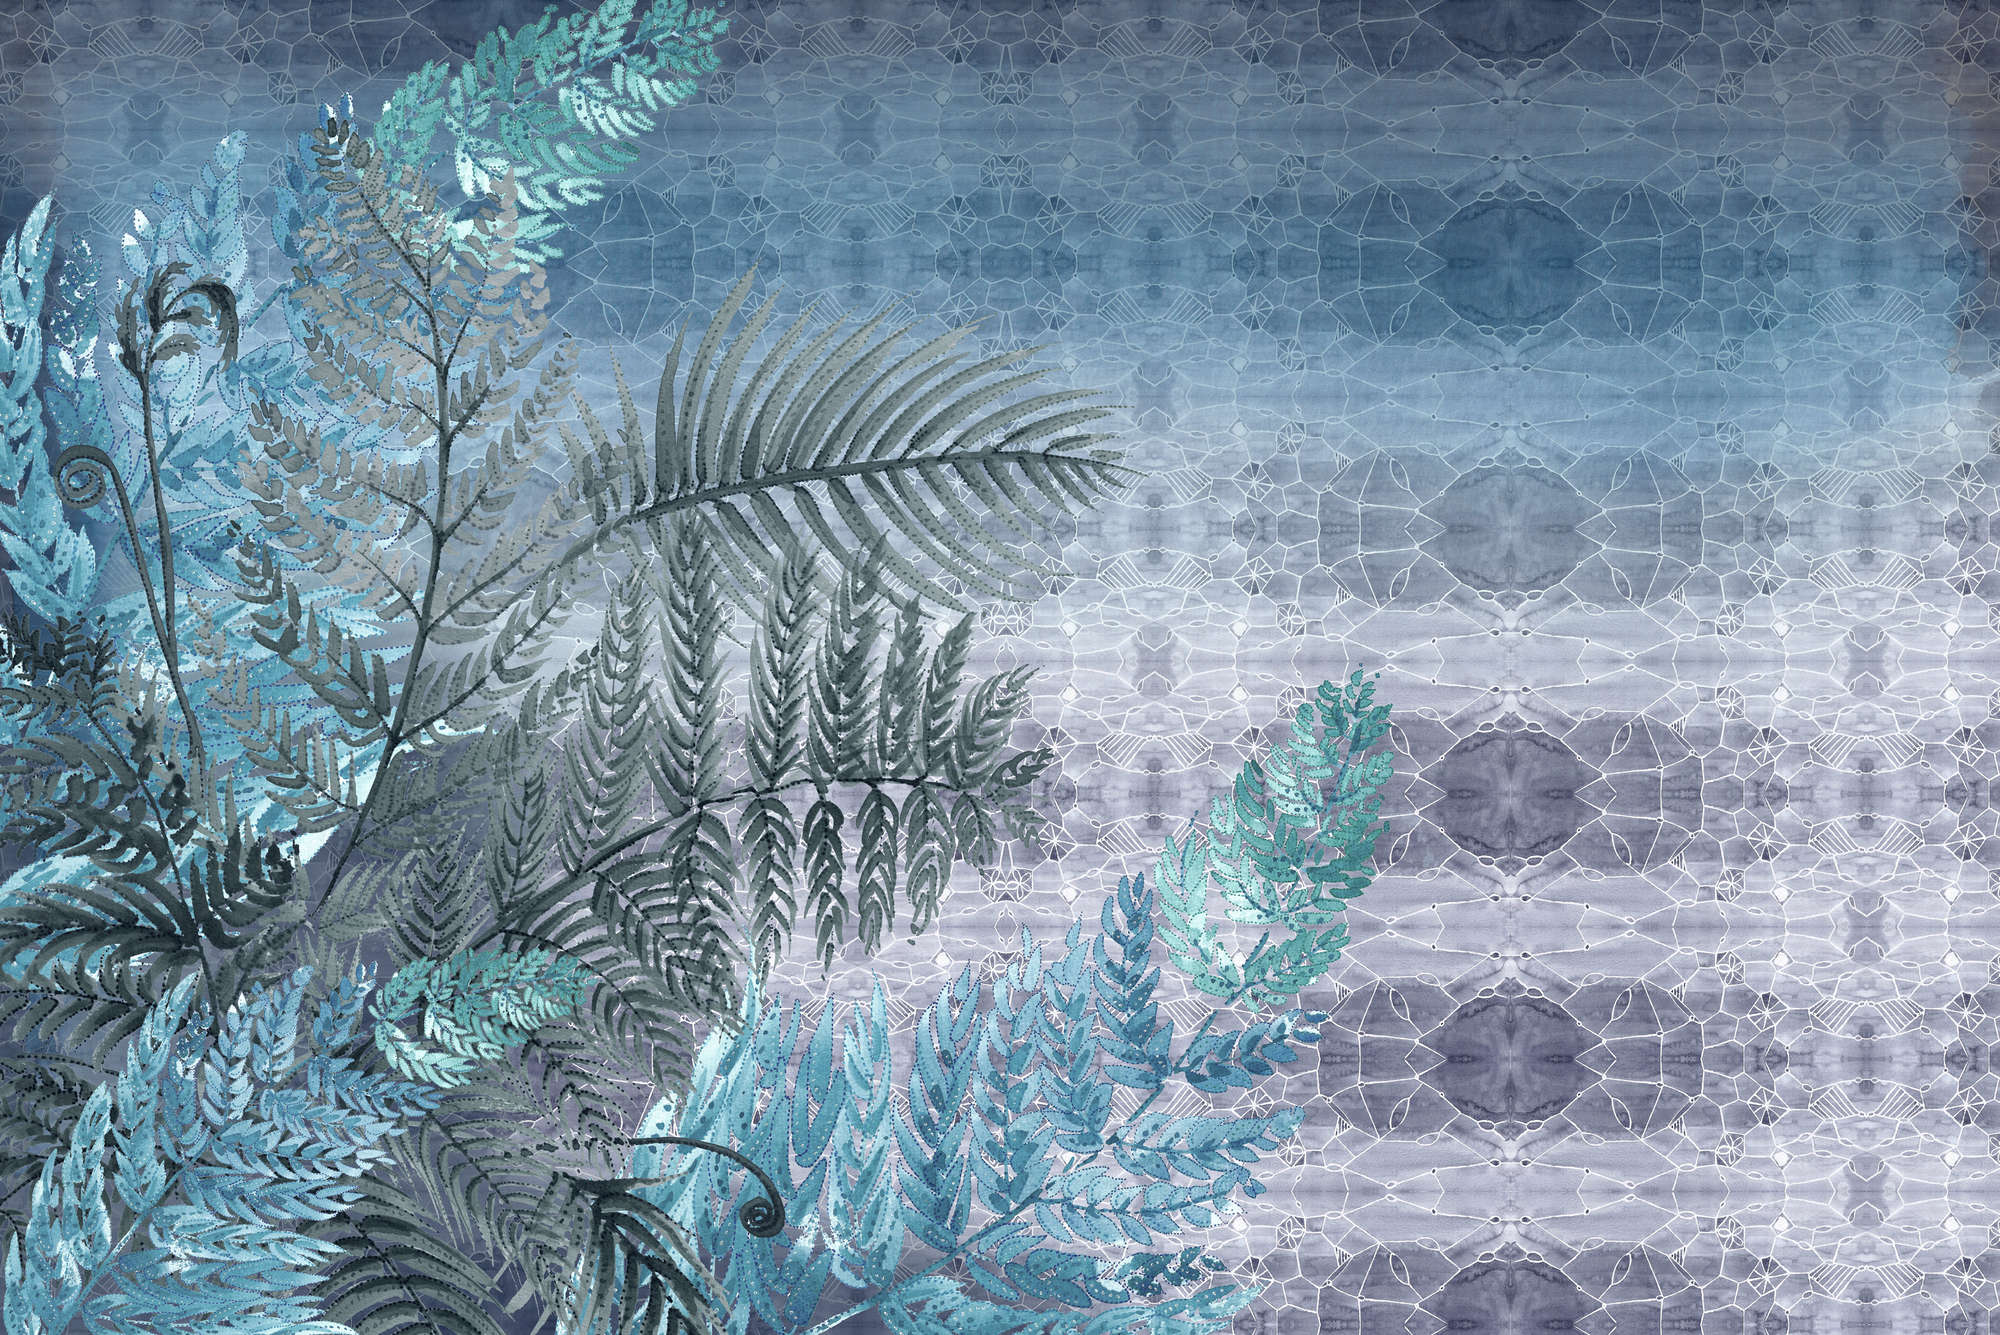             Watercolour mural fern pattern in blue and purple on premium smooth vinyl
        